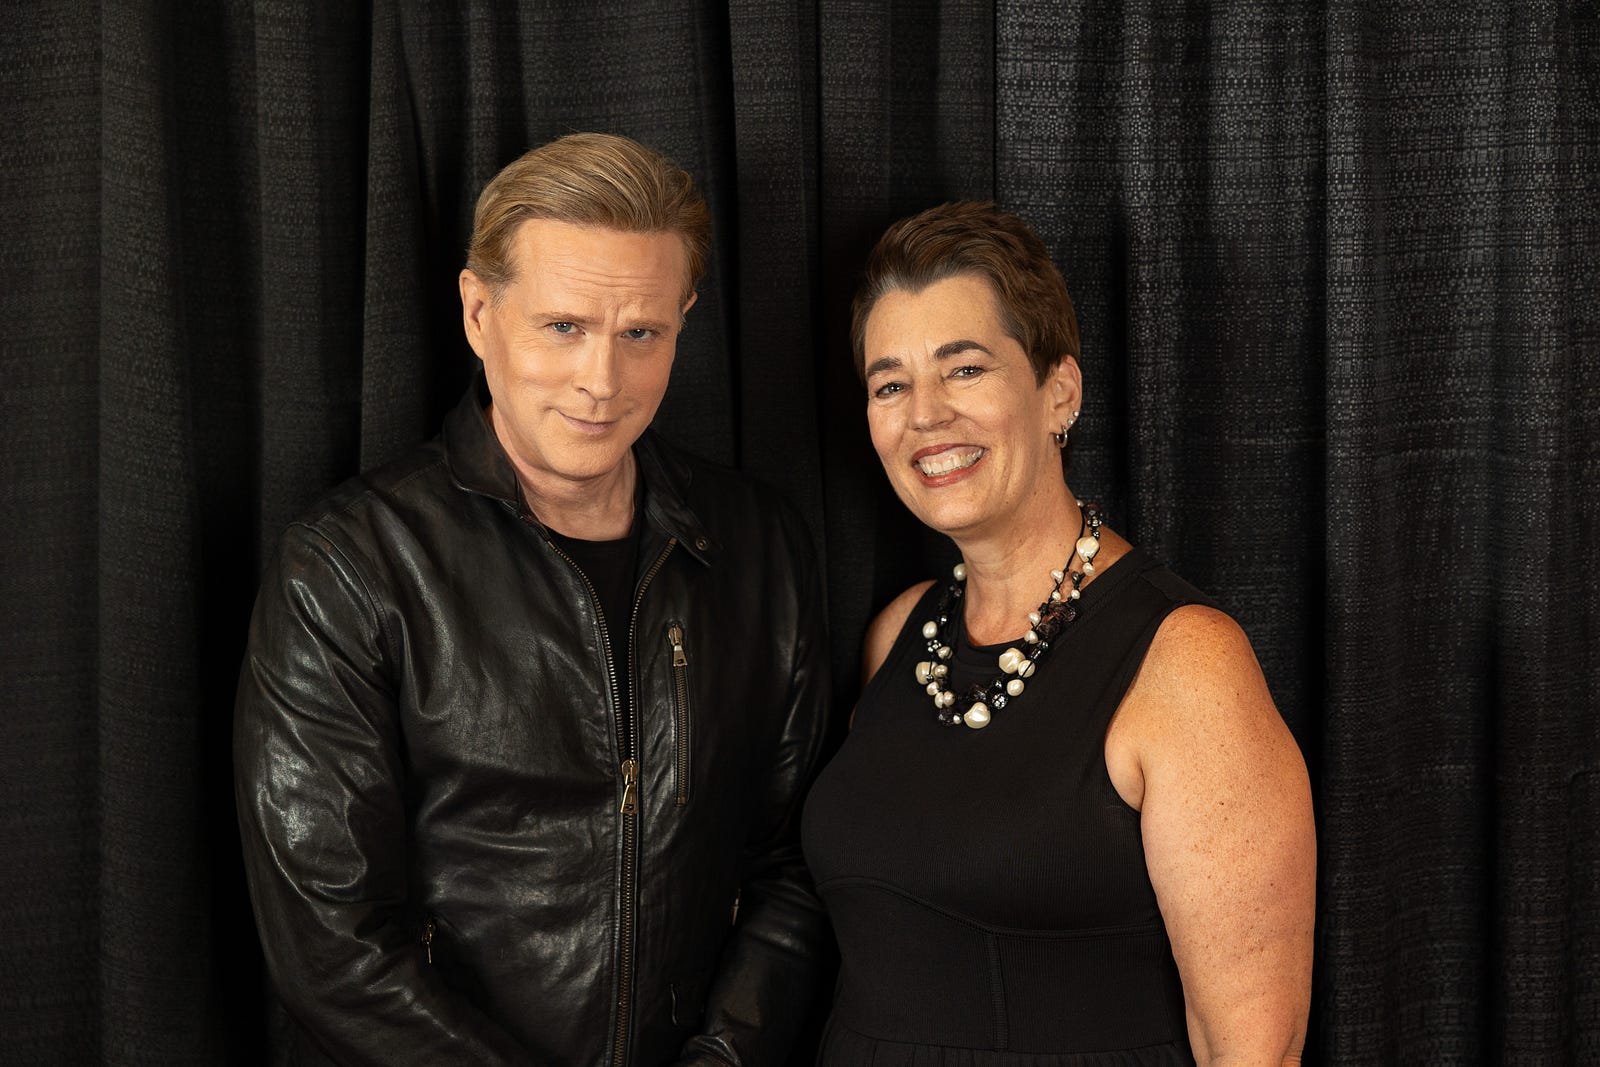 Julia Byrd with actor Cary Elwes